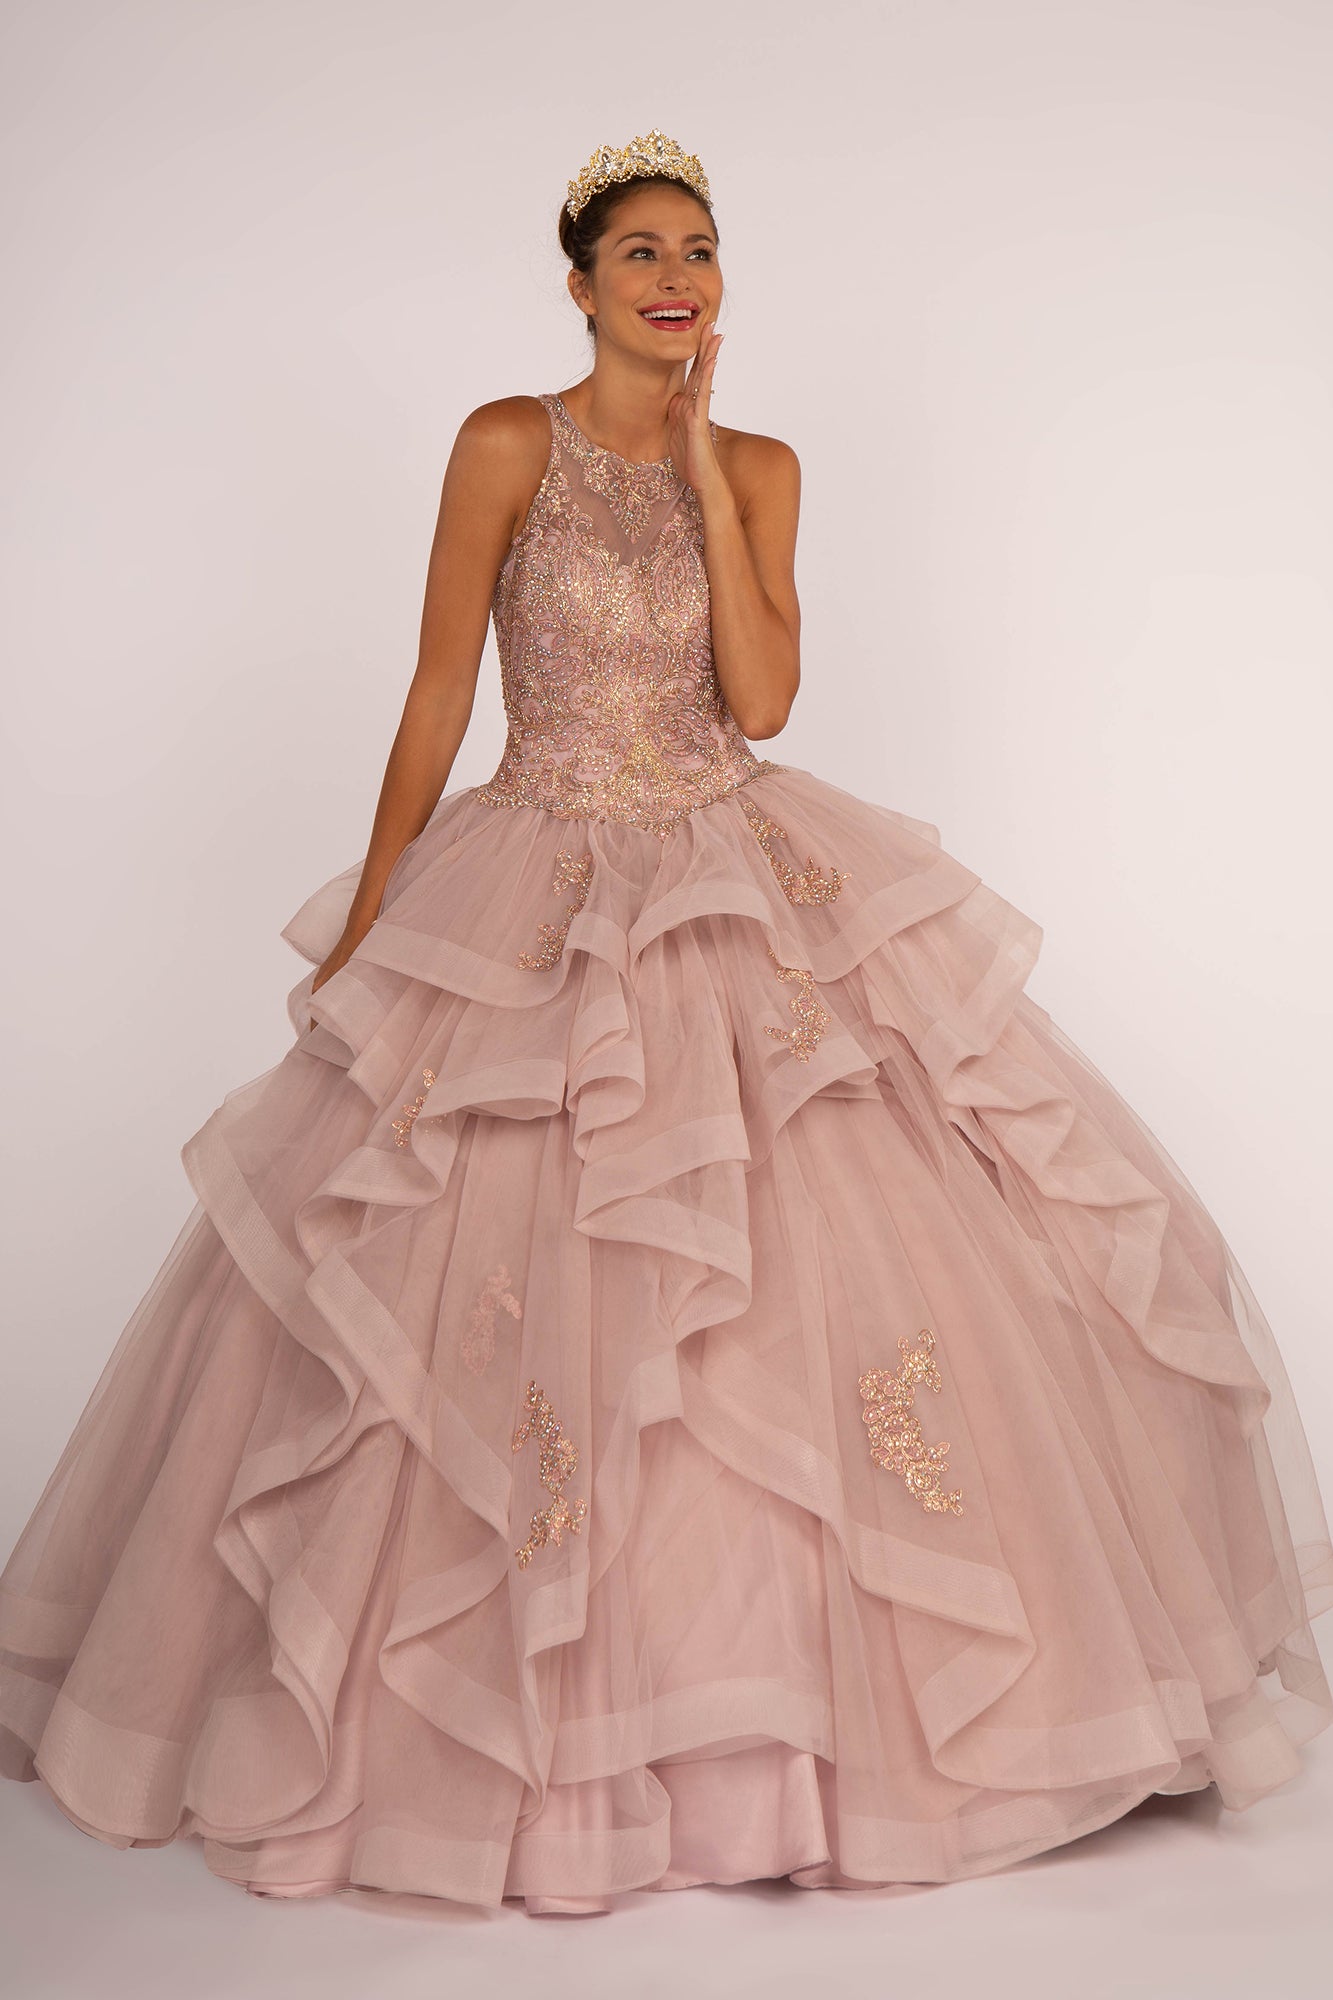 Full Embroidered Bodice Multi-Layered Ruffle Skirt Ball Gown-smcdress